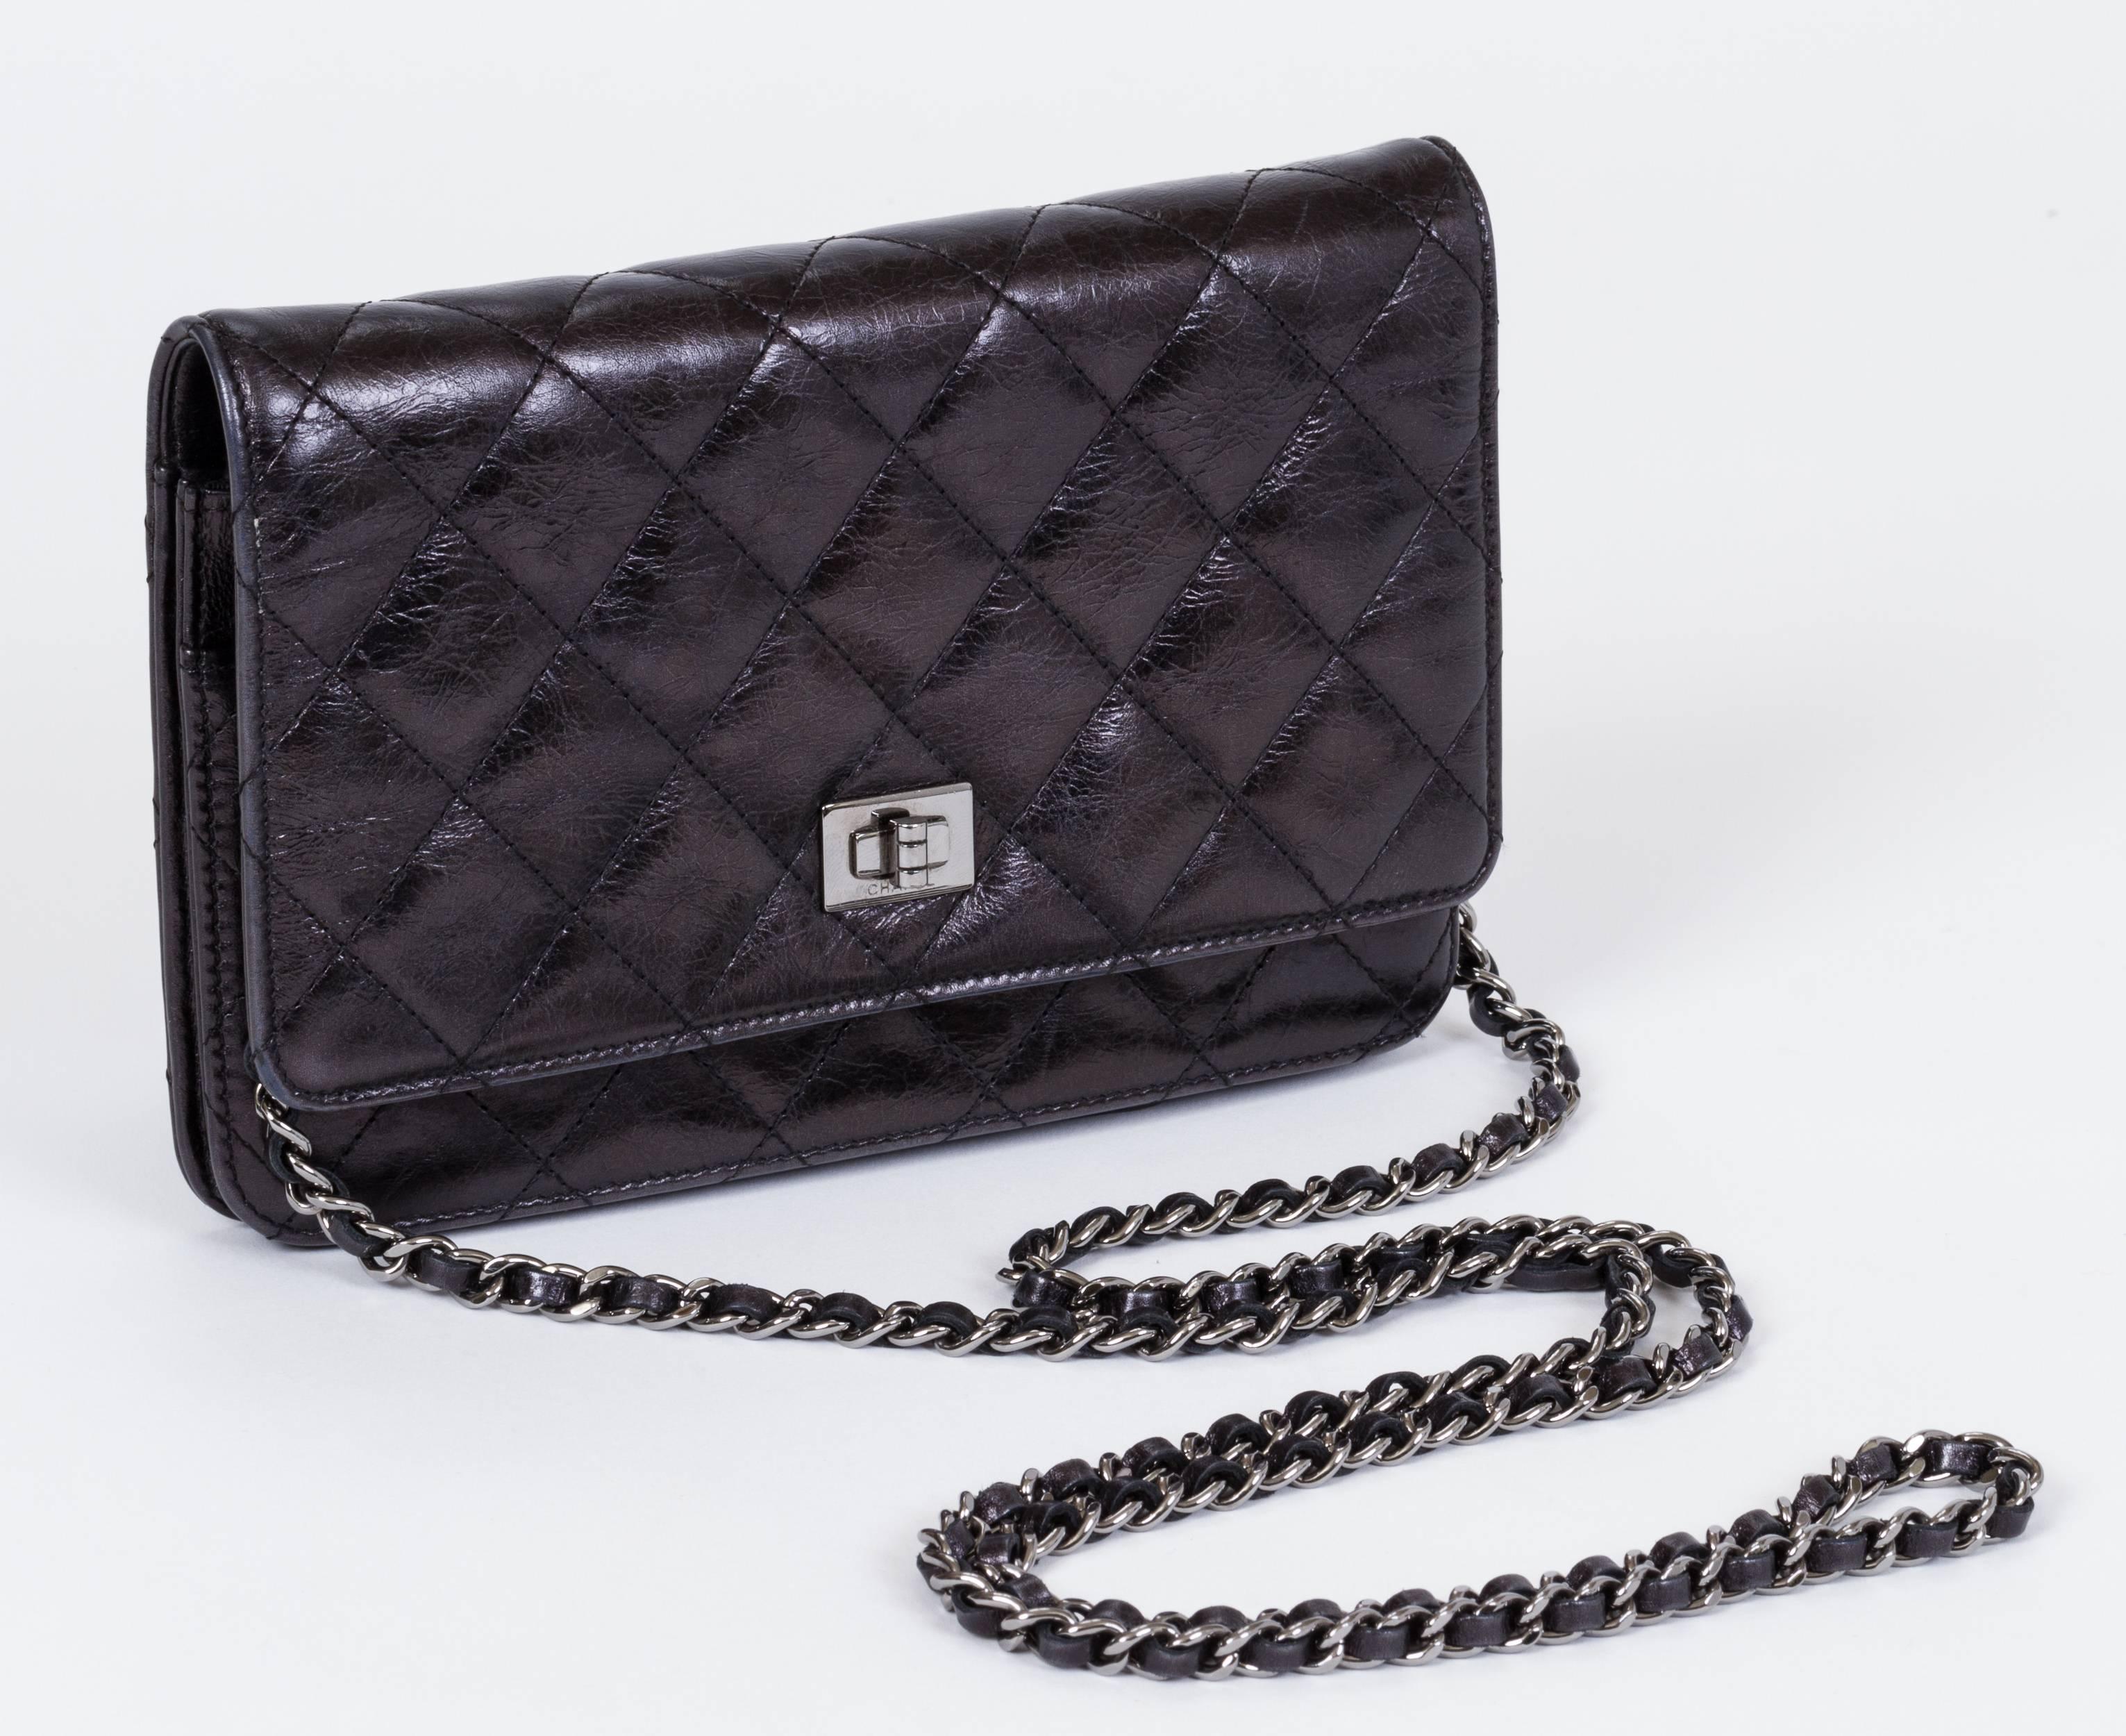 Chanel black distressed reissue quilted wallet on a chain with gunmetal hardware. Can be worn as a clutch or as a cross body. Very good condition. Measurements 7.5